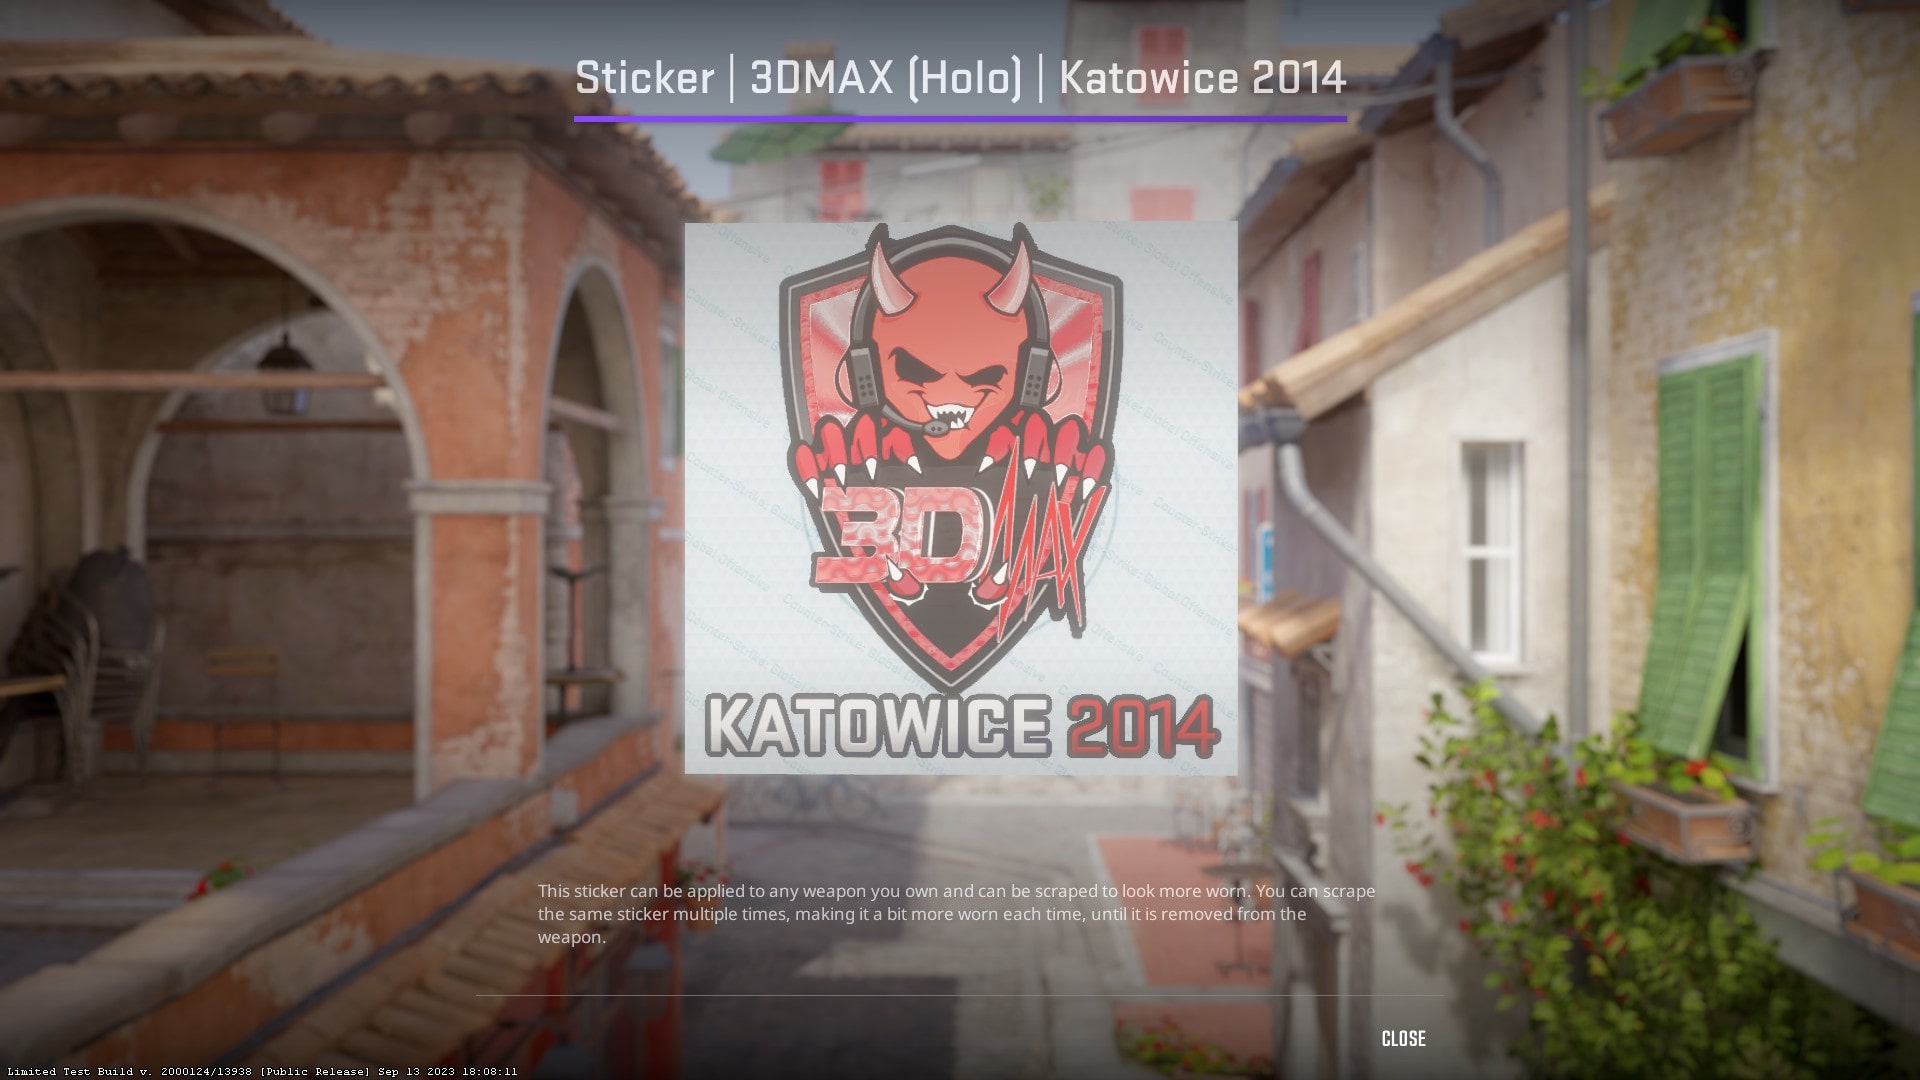 Sticker 3DMAX (Holo) Katowice 2014 Current Price